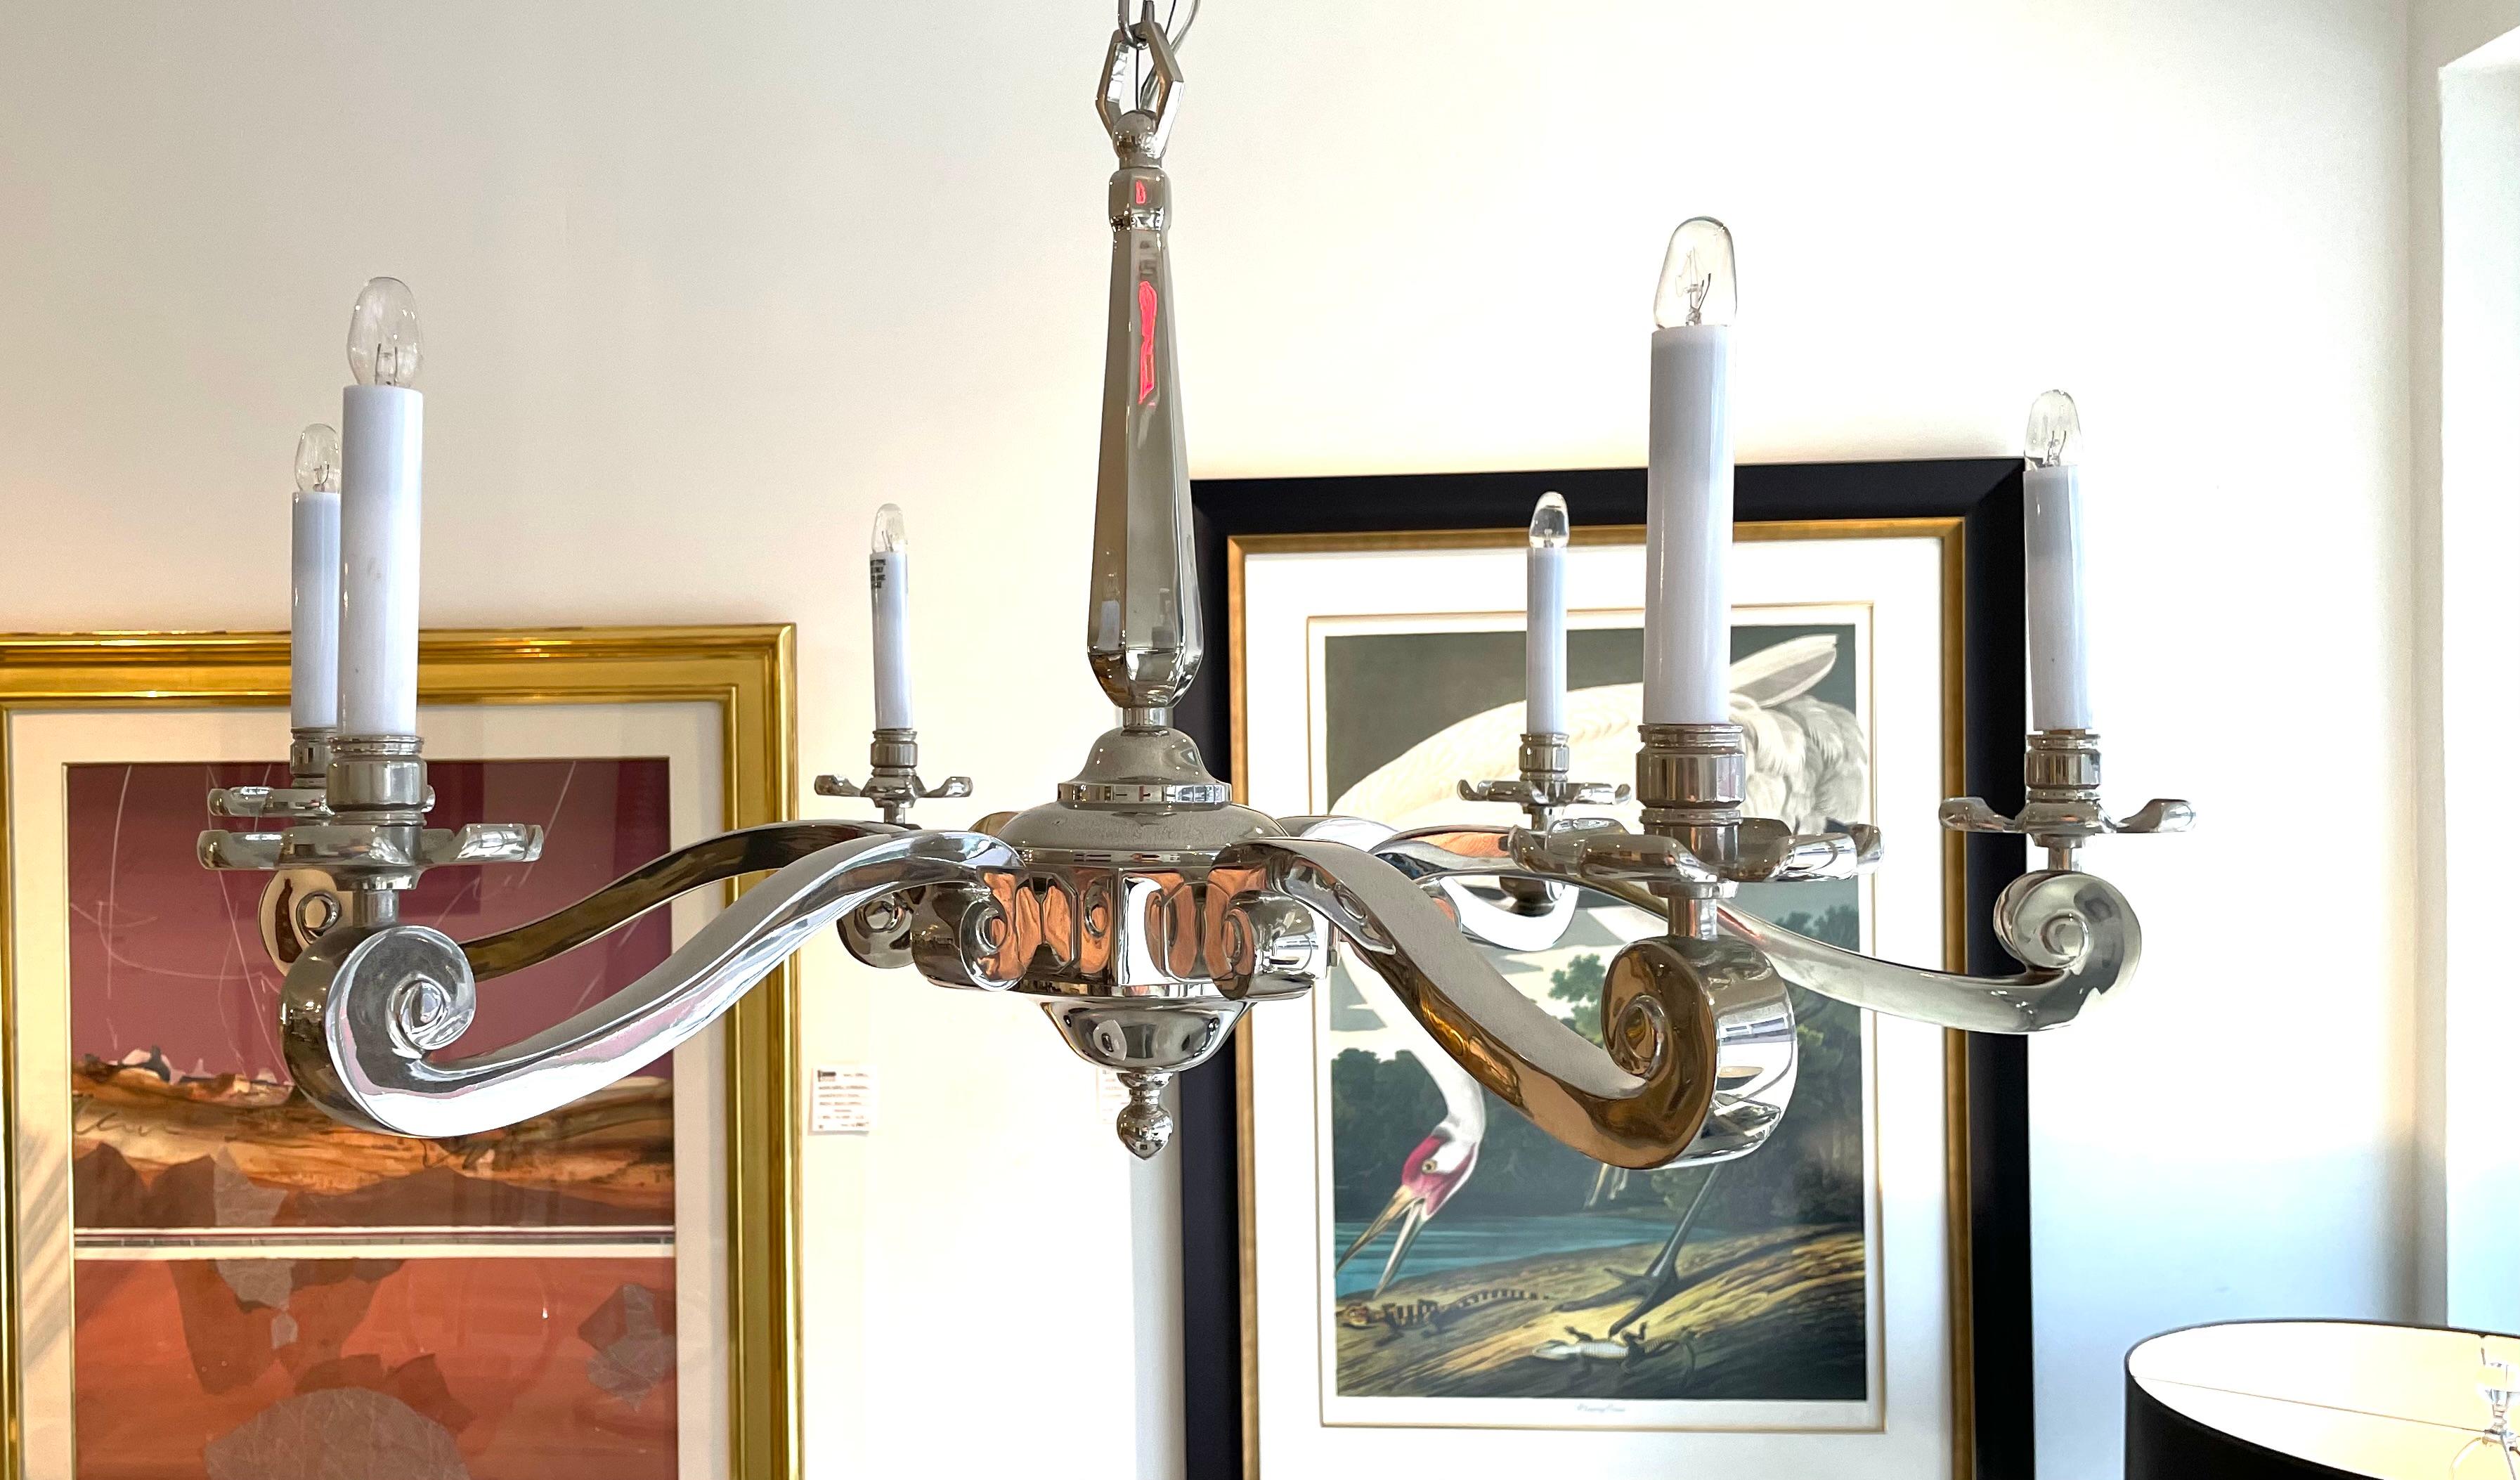 This stylish and chic Georgian Revival style chandelier will make a statement with its form and use of materials. The nickel plating gives the piece a modern take on a traditional form. 

Note: Overall height including the chain and canopy just at